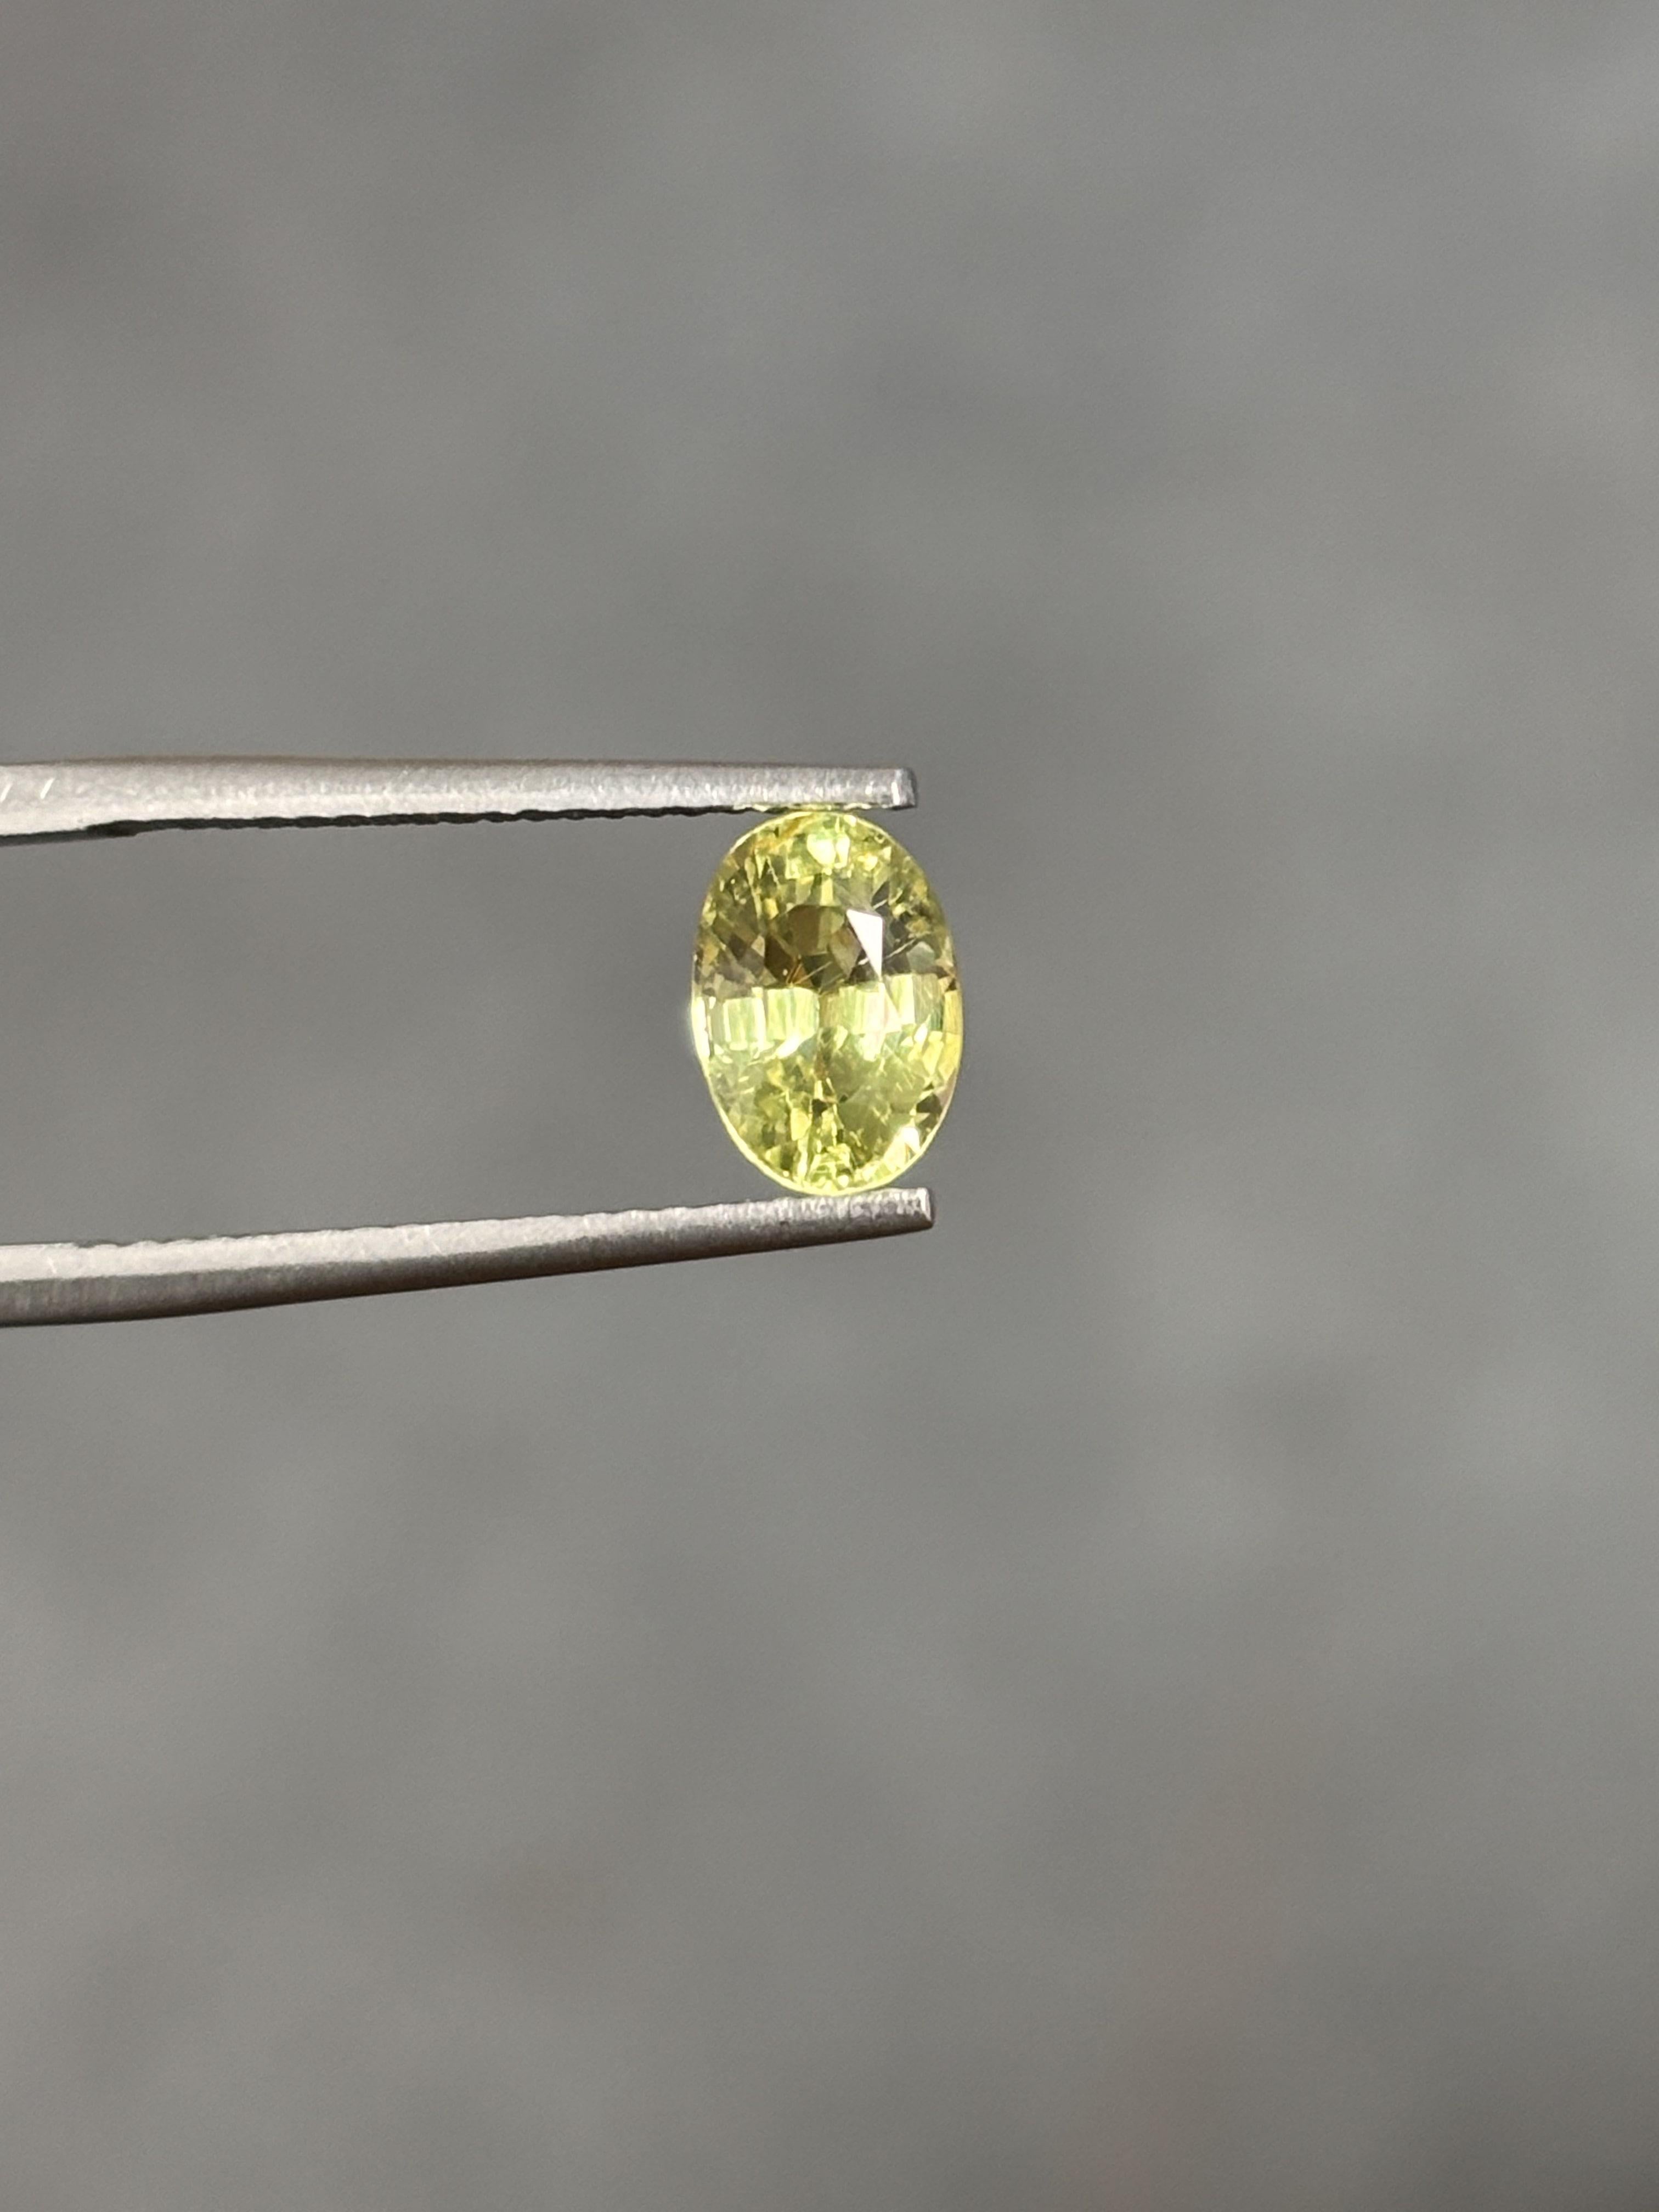 A breathtaking 1.66 Carat Chrysoberyl stone that is a gorgeous shade of yellowish green.  The chrysoberyl hasn't undergone any form of treatment and is completely natural and of good quality. It is cut into perfection in an oval-cut shape.

The